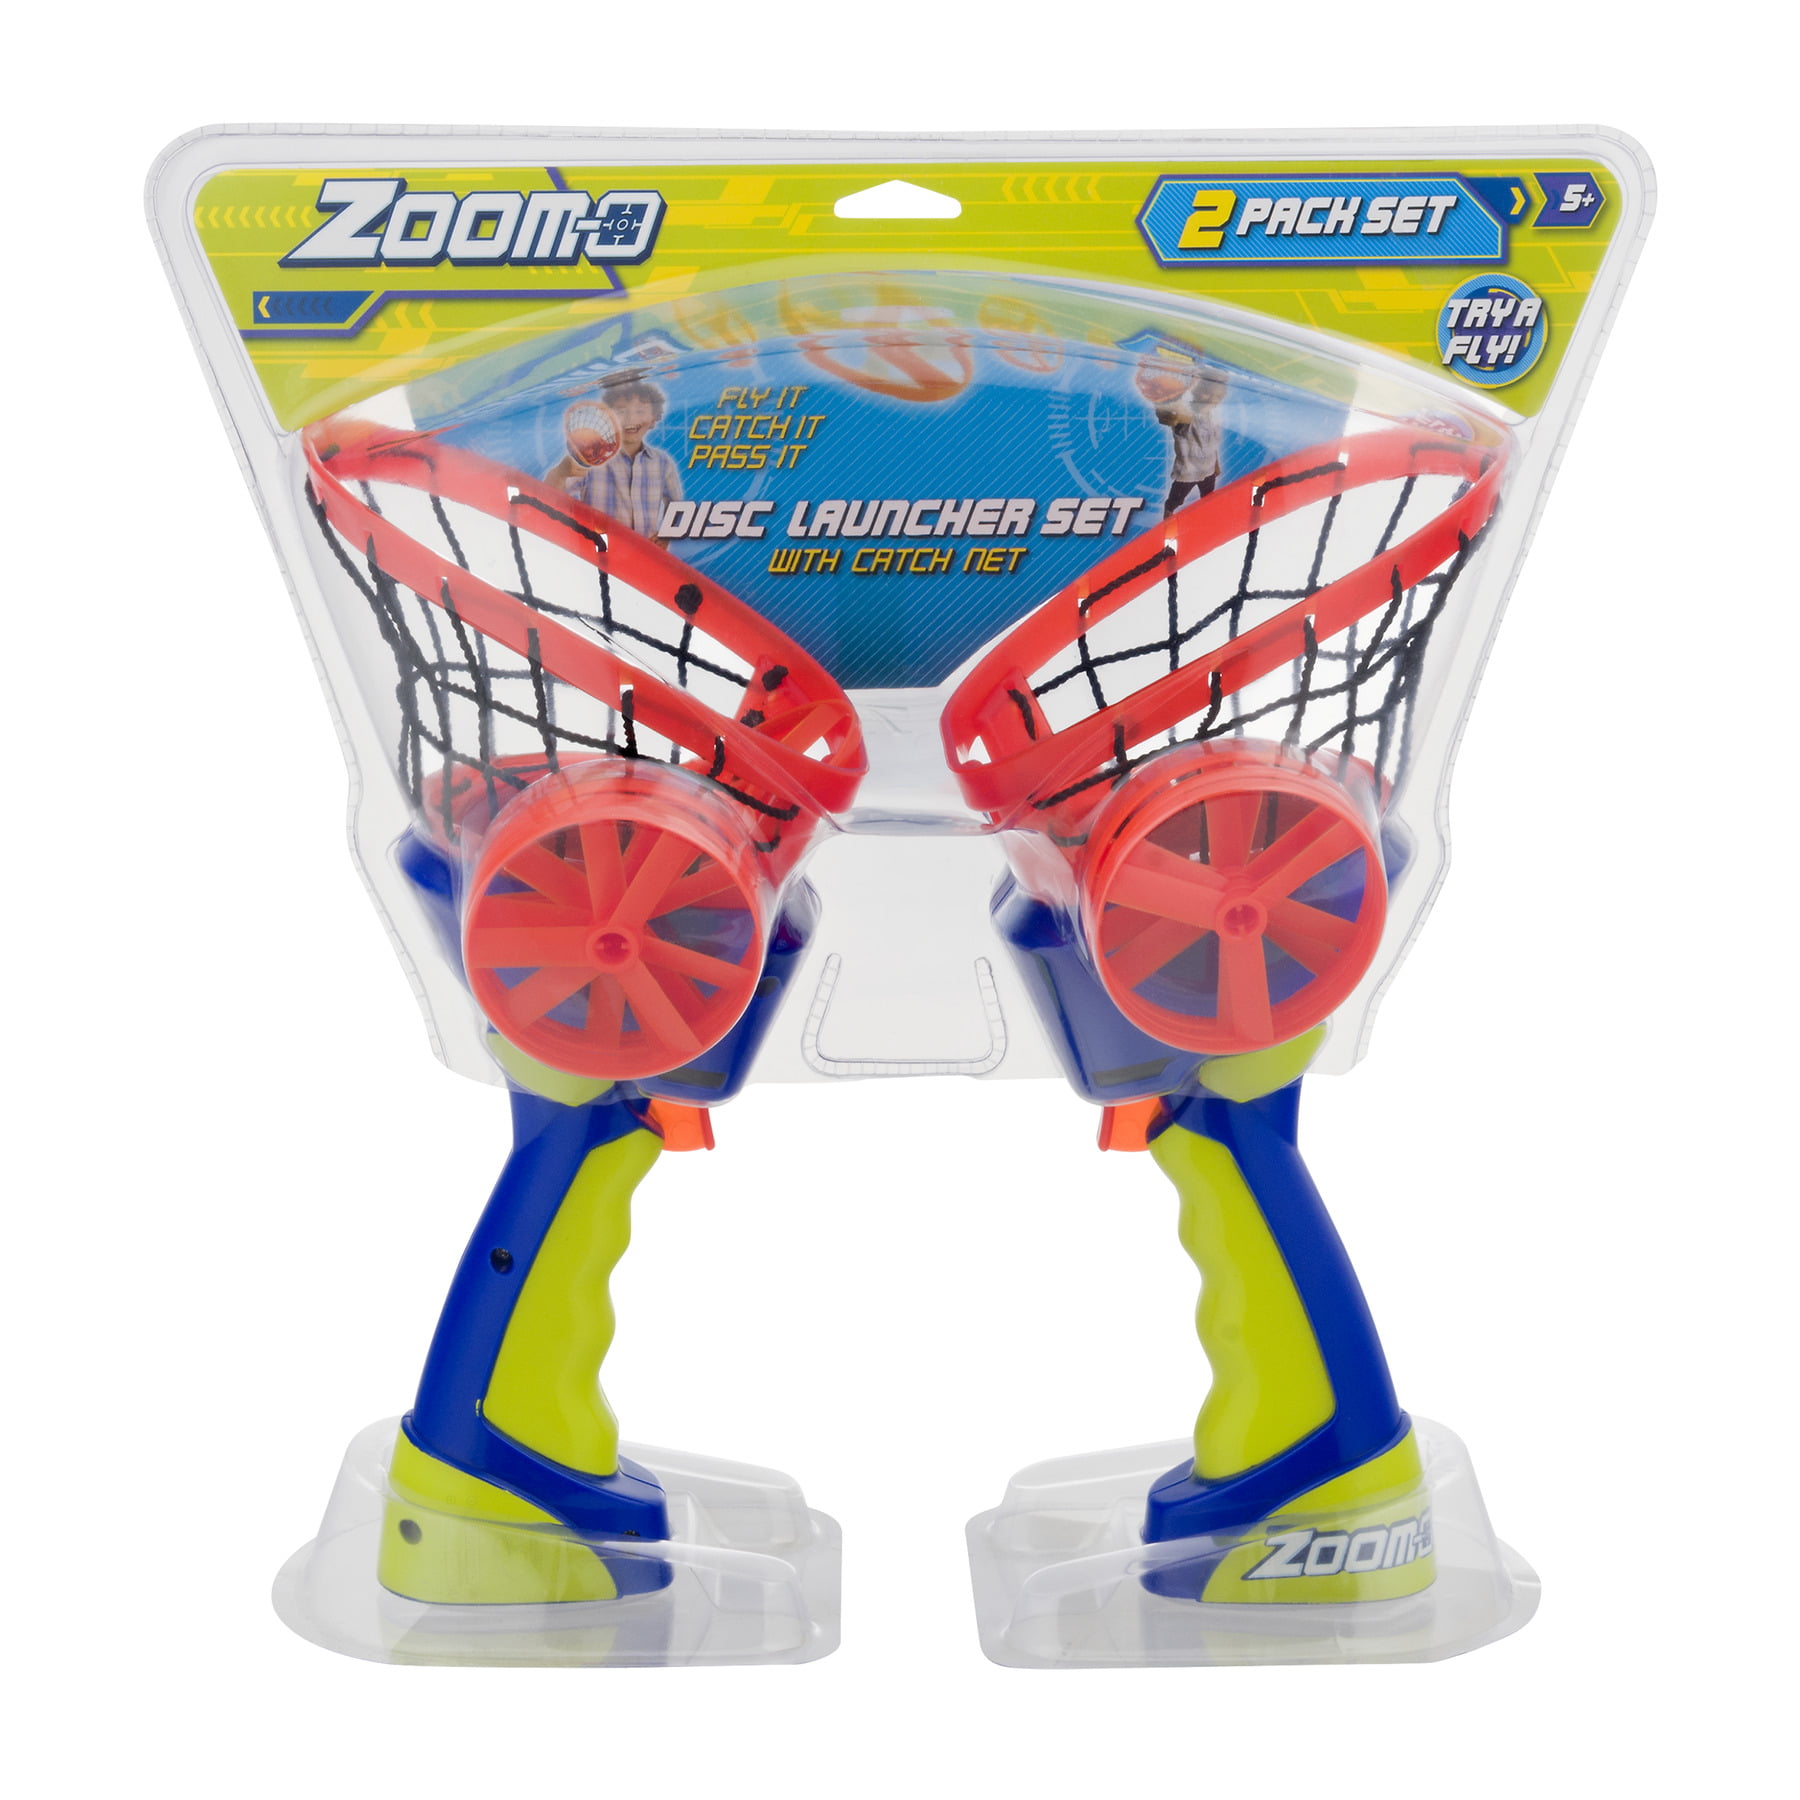 Catch It Zoom-O Disc Launcher Set With Catch Net Fly It Pass It! 